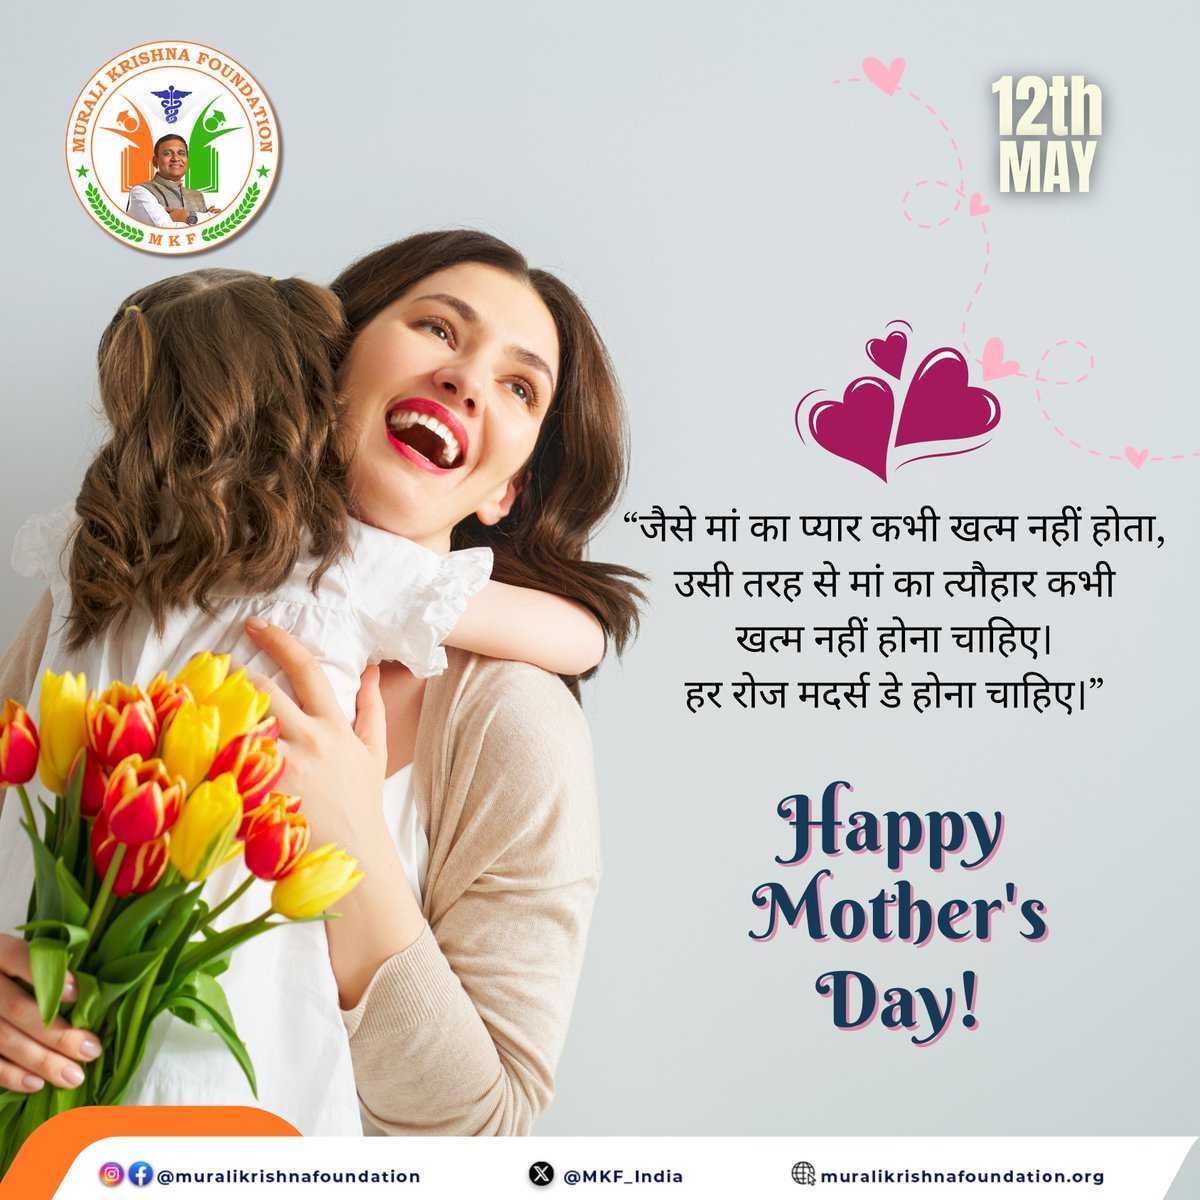 Sending warm wishes to all the amazing moms on this special day. 

Happy Mother's Day! 🌺

#muralikrishnafoundation #dmuralikrishna #mkf #MKFoundation #Bargarh #Odisha #HappyMothersDay #MothersDay #mothers